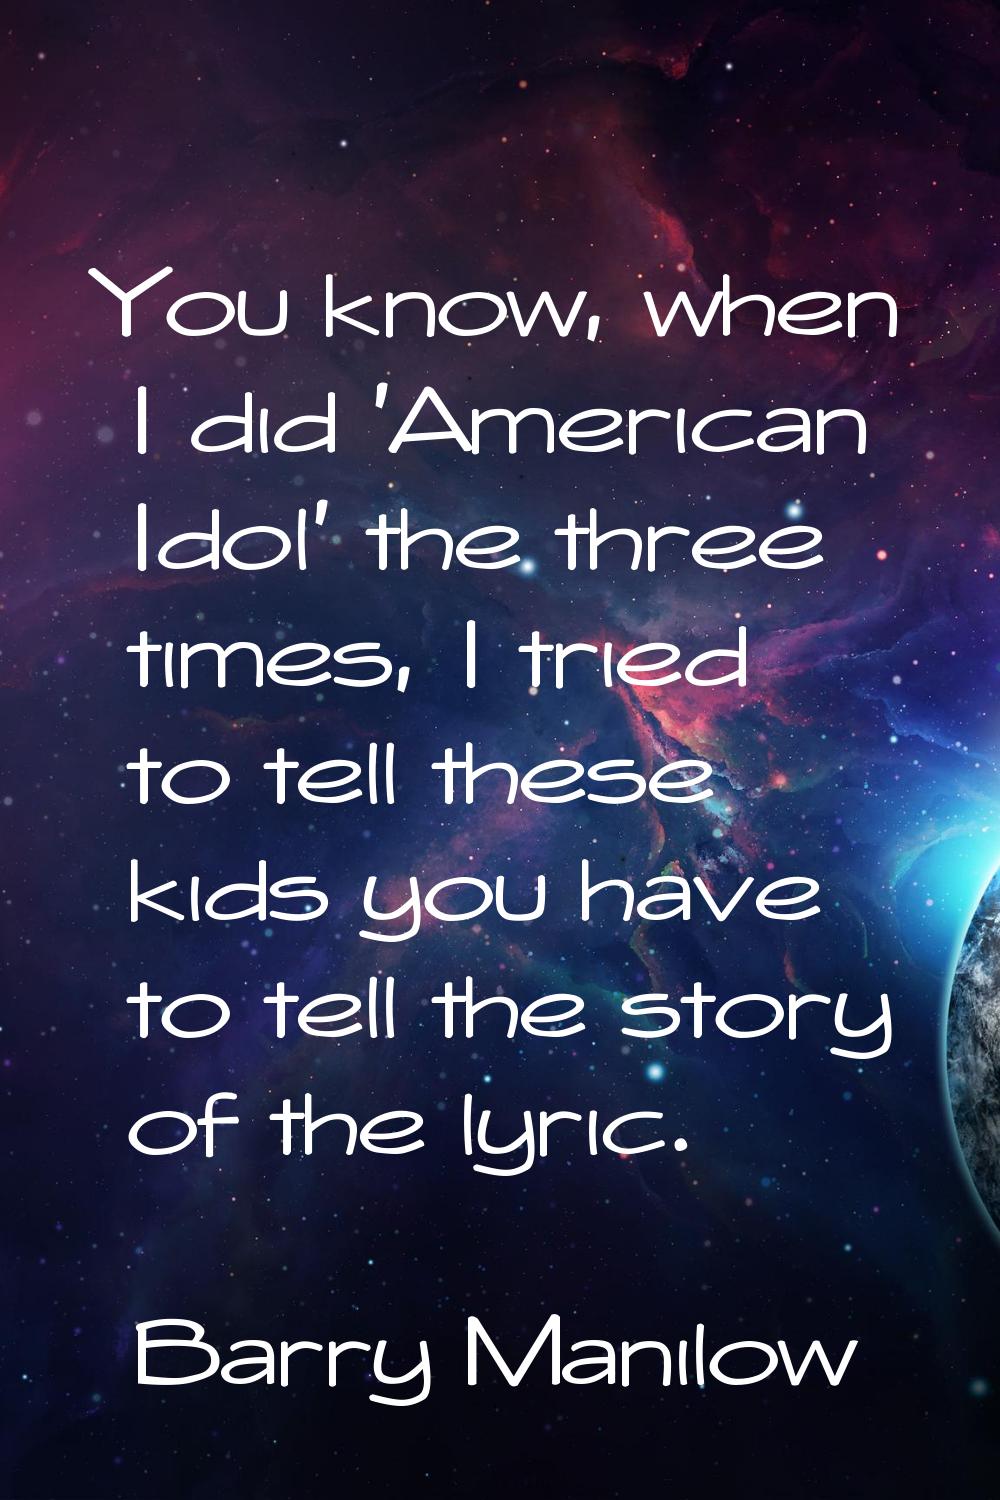 You know, when I did 'American Idol' the three times, I tried to tell these kids you have to tell t